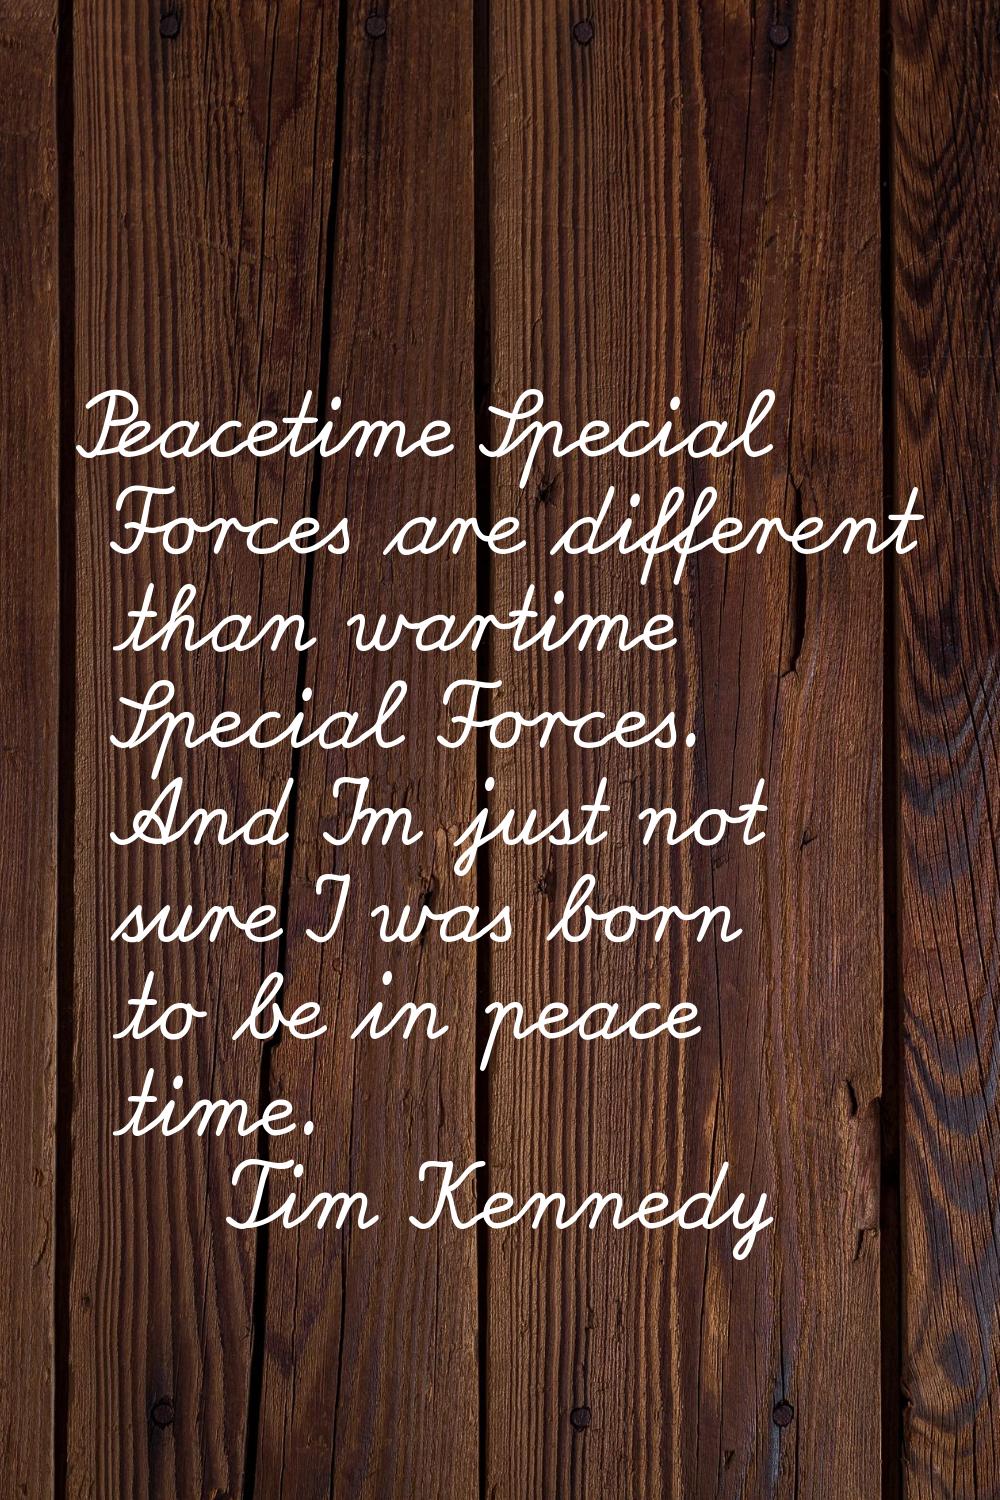 Peacetime Special Forces are different than wartime Special Forces. And I'm just not sure I was bor